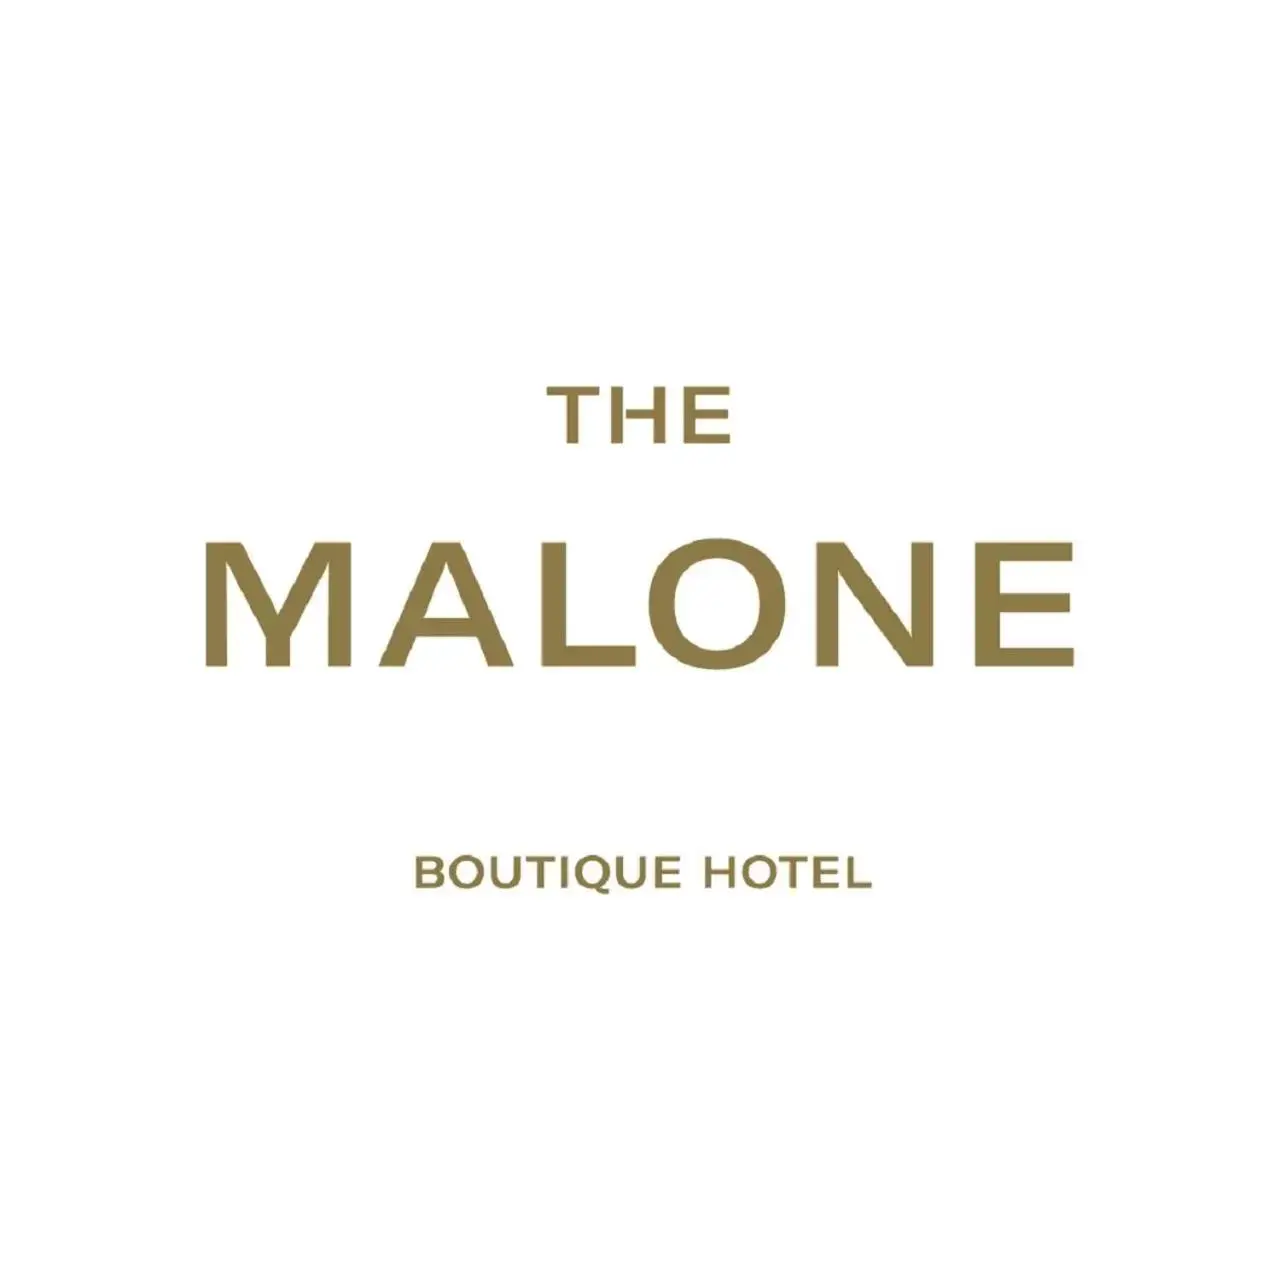 Property logo or sign in The Malone